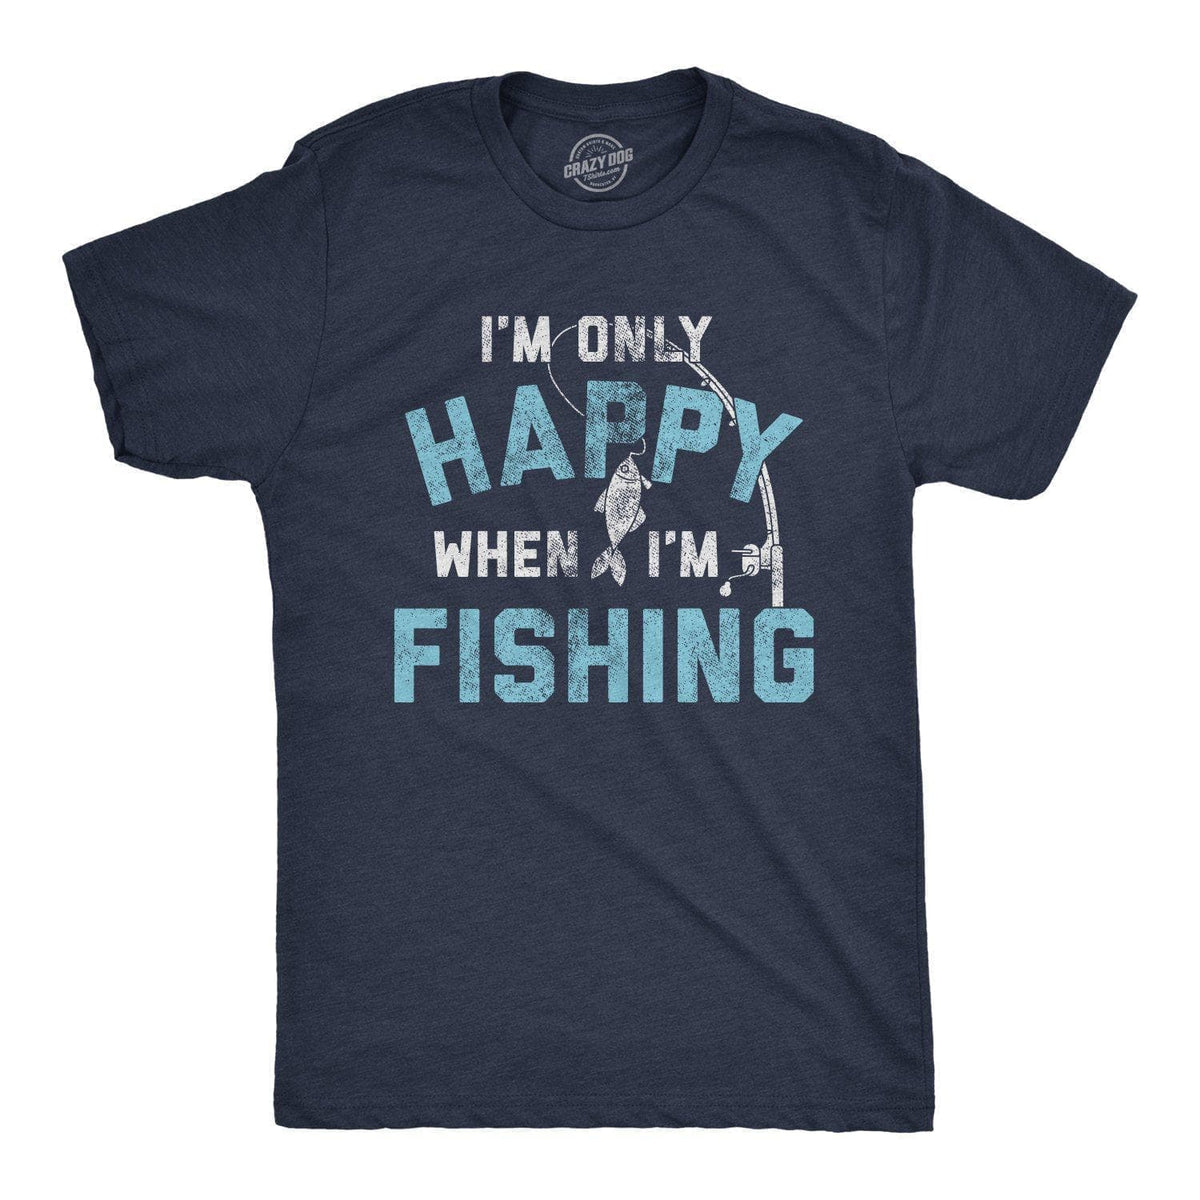 Crazy Dog Tshirts Mens I'm Only Happy When I'm Fishing Tshirt Funny Fathers Day Outdoor Hobby Gift Tee, Blue